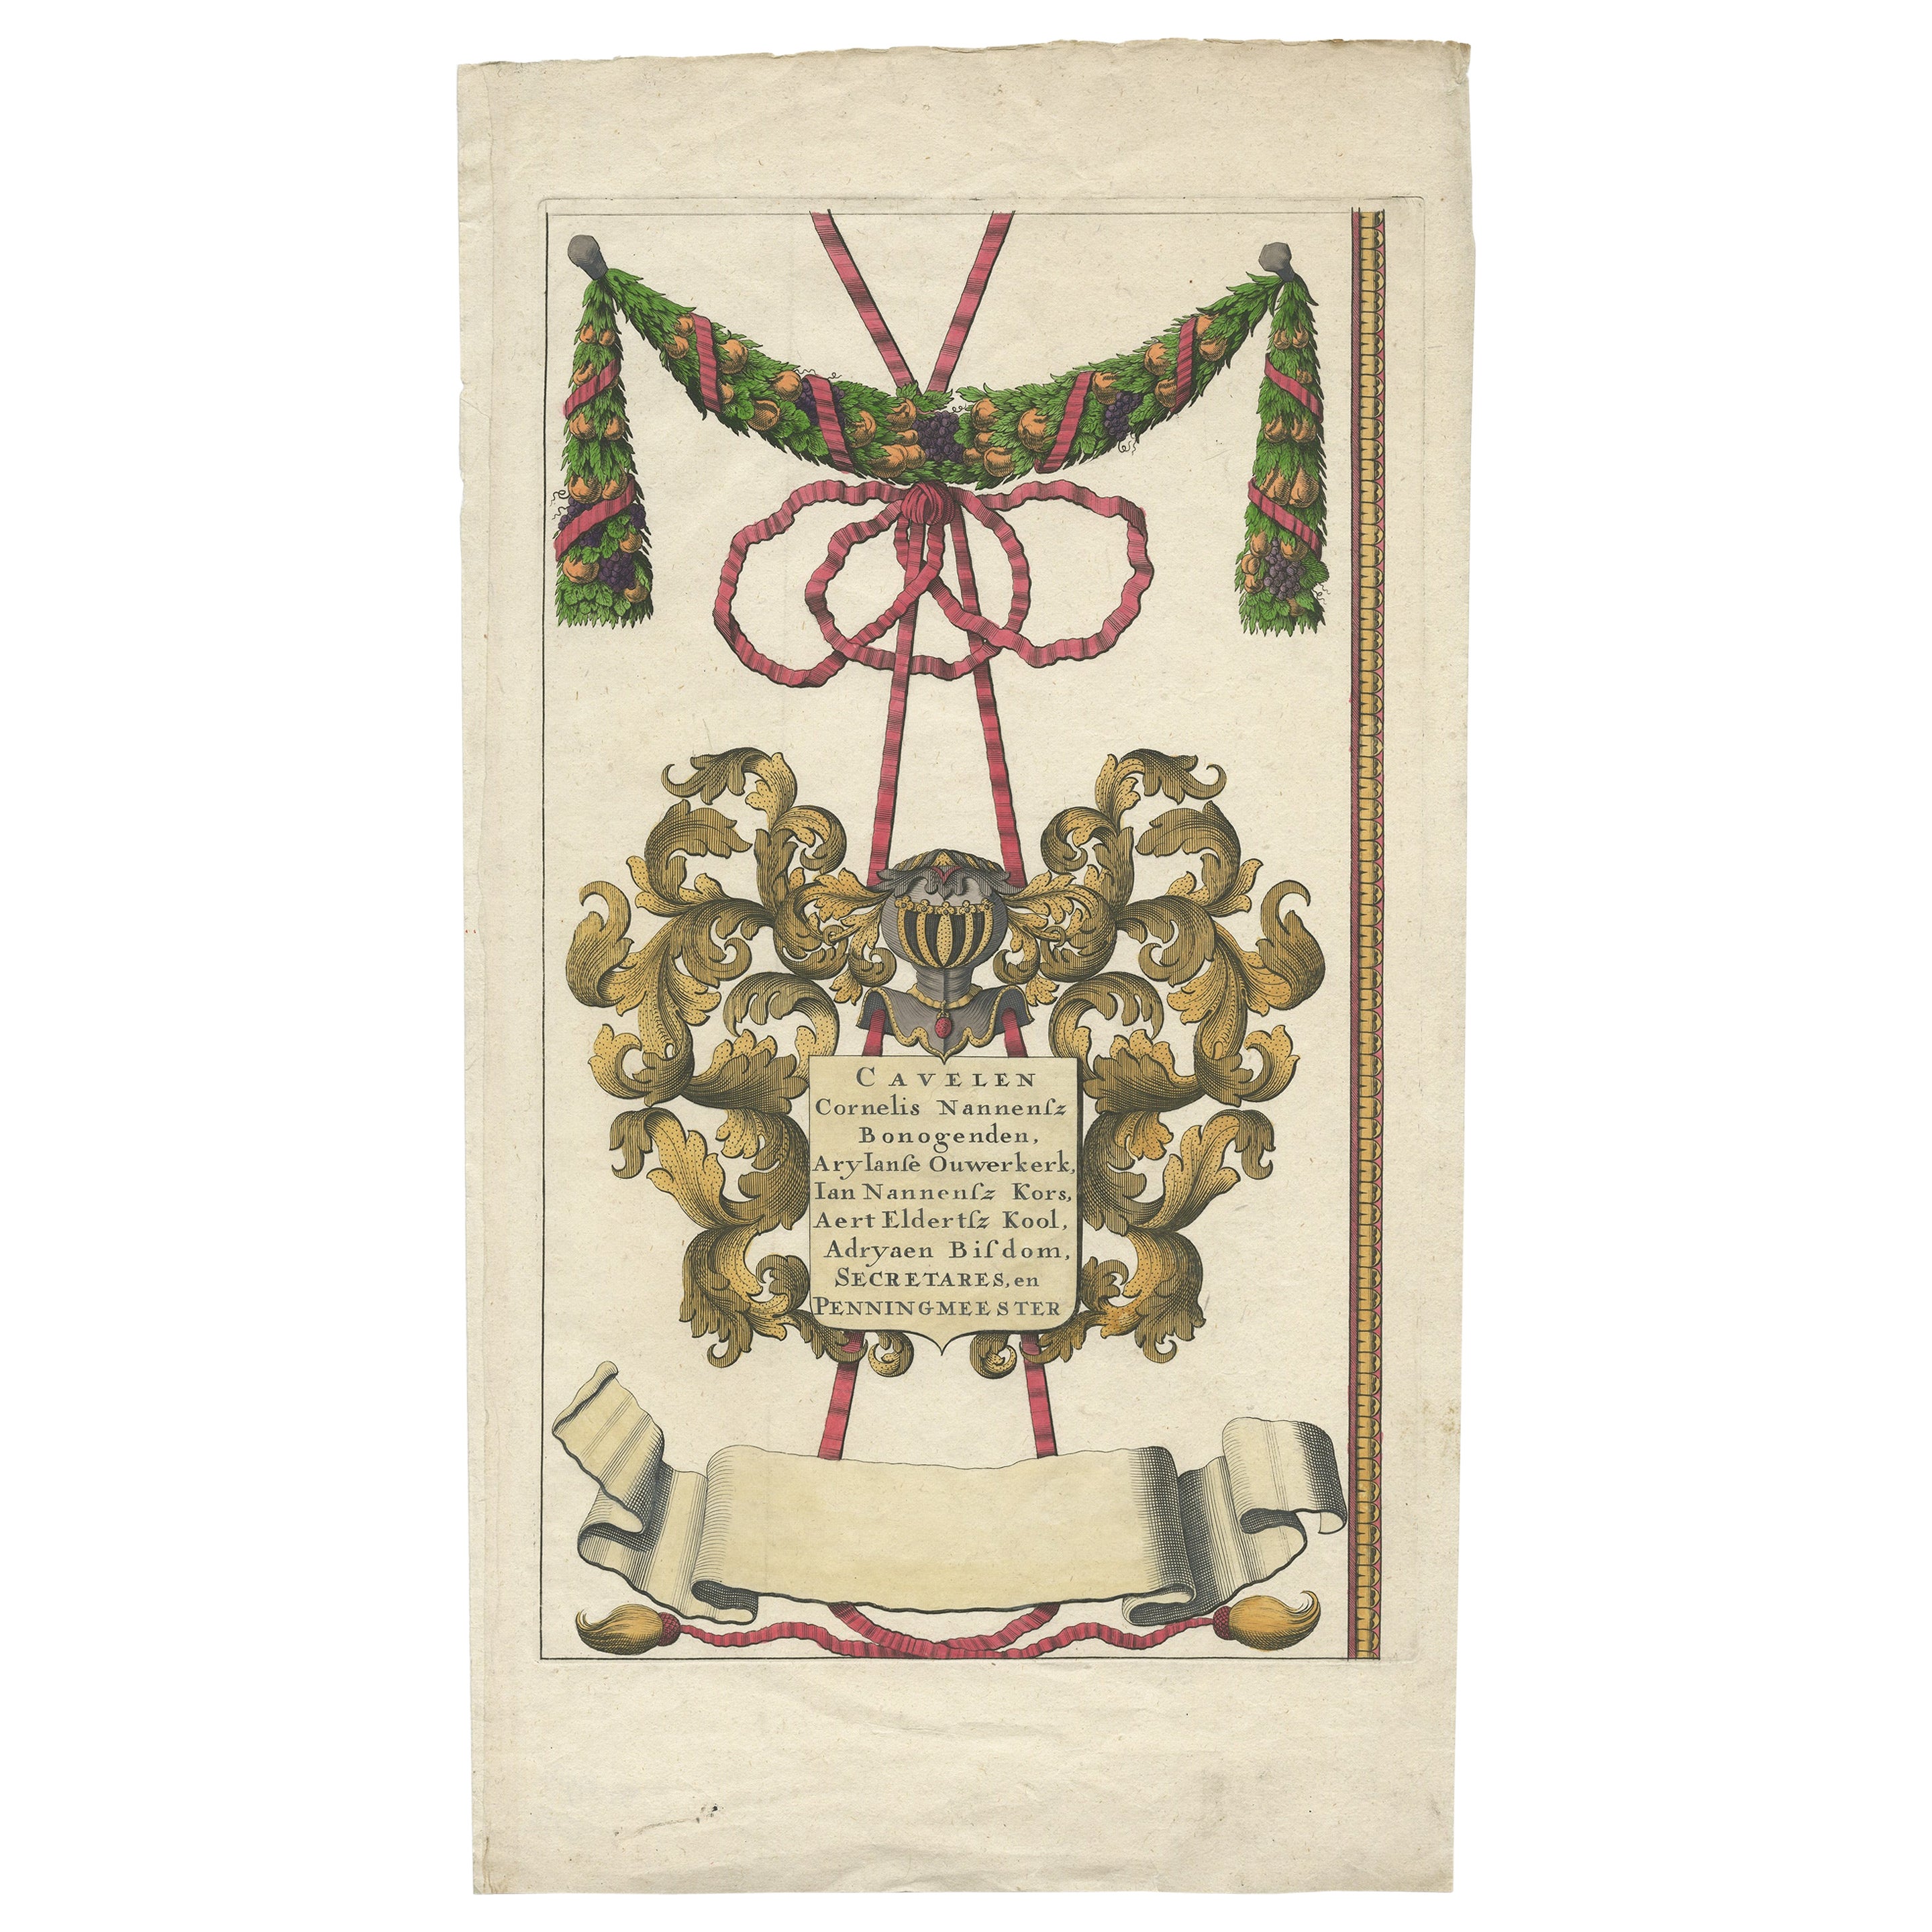 Antique Engraving of a Coat of Arms, Originally Published in 1683